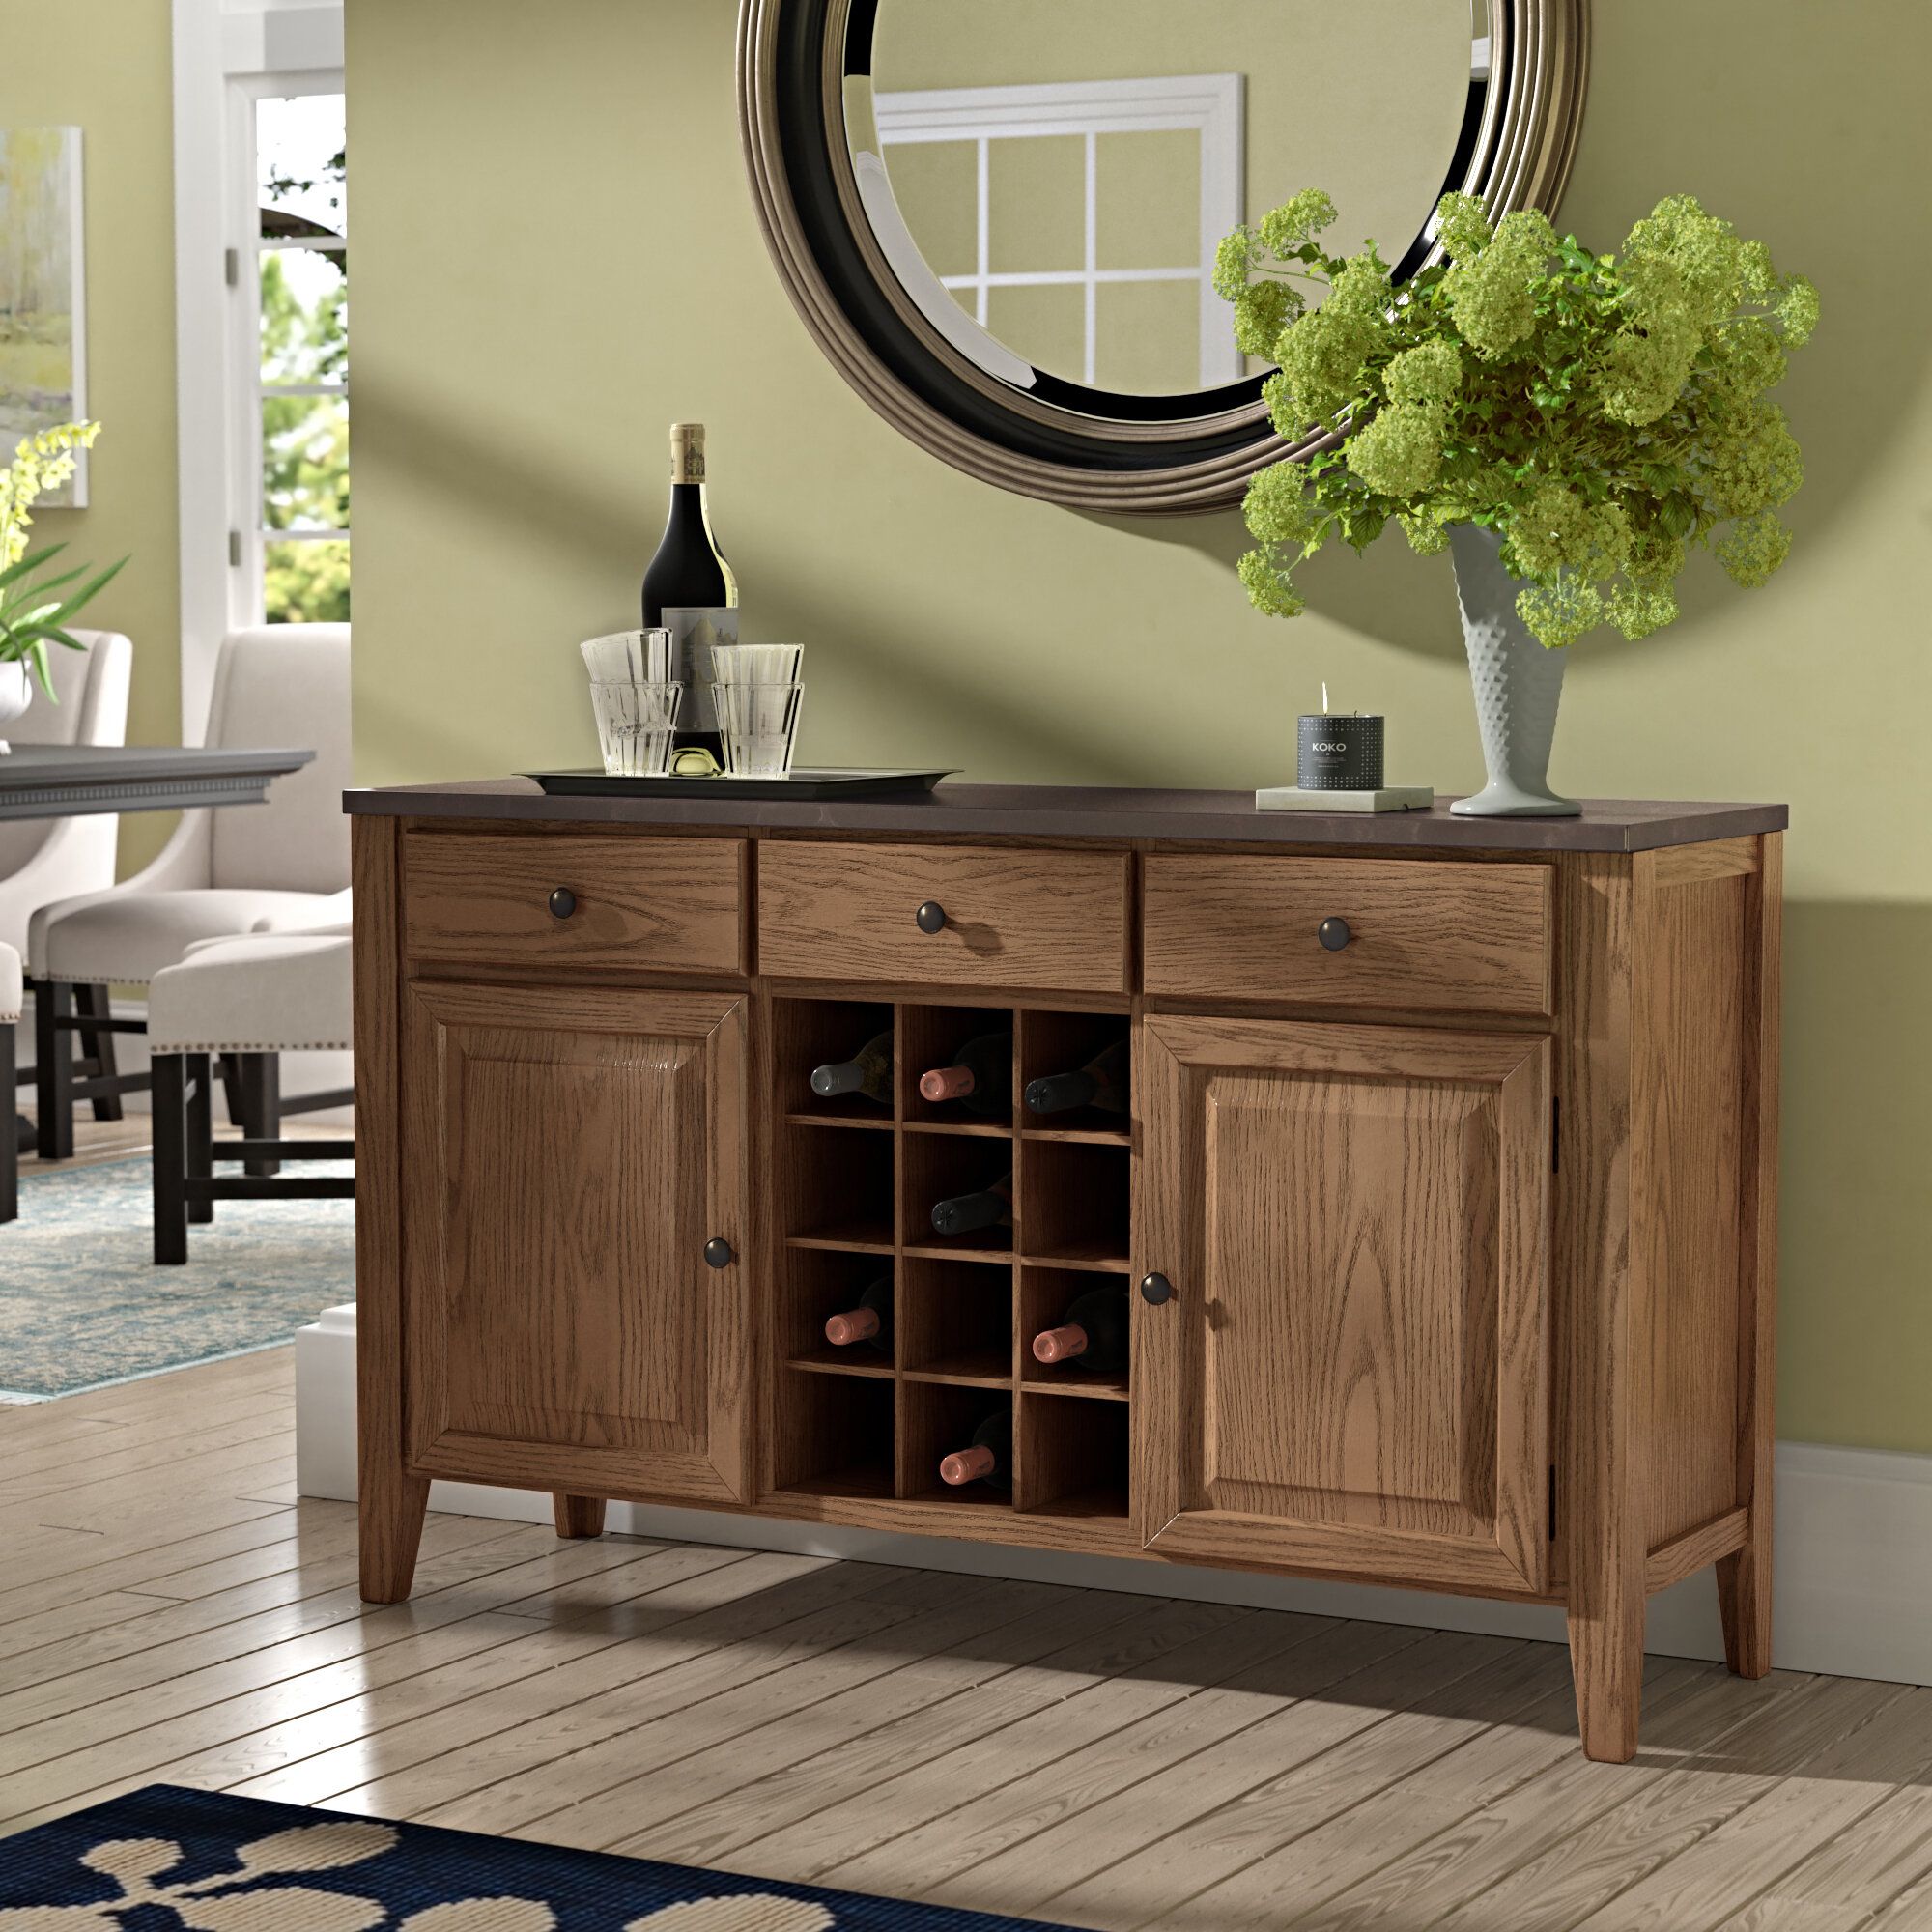 Chugwater Sideboard Throughout Whitten Sideboards (View 16 of 30)